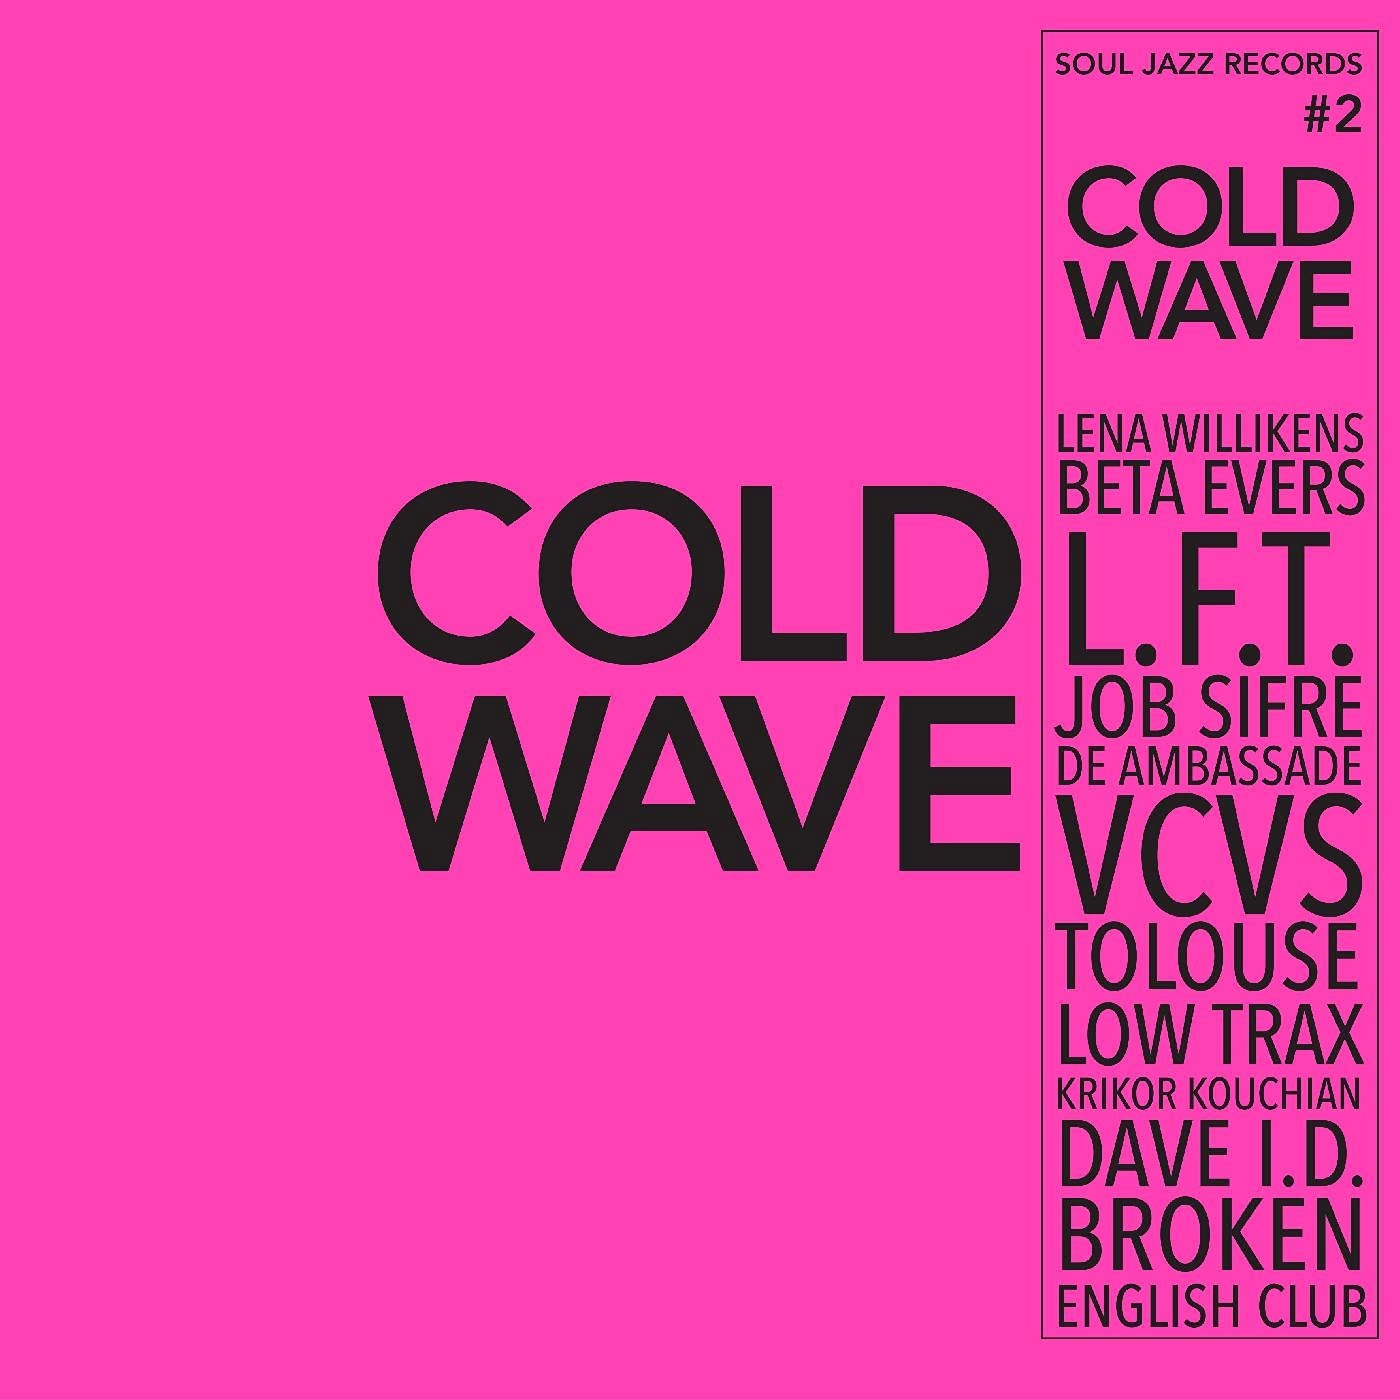 Cold waves. Beta evers.